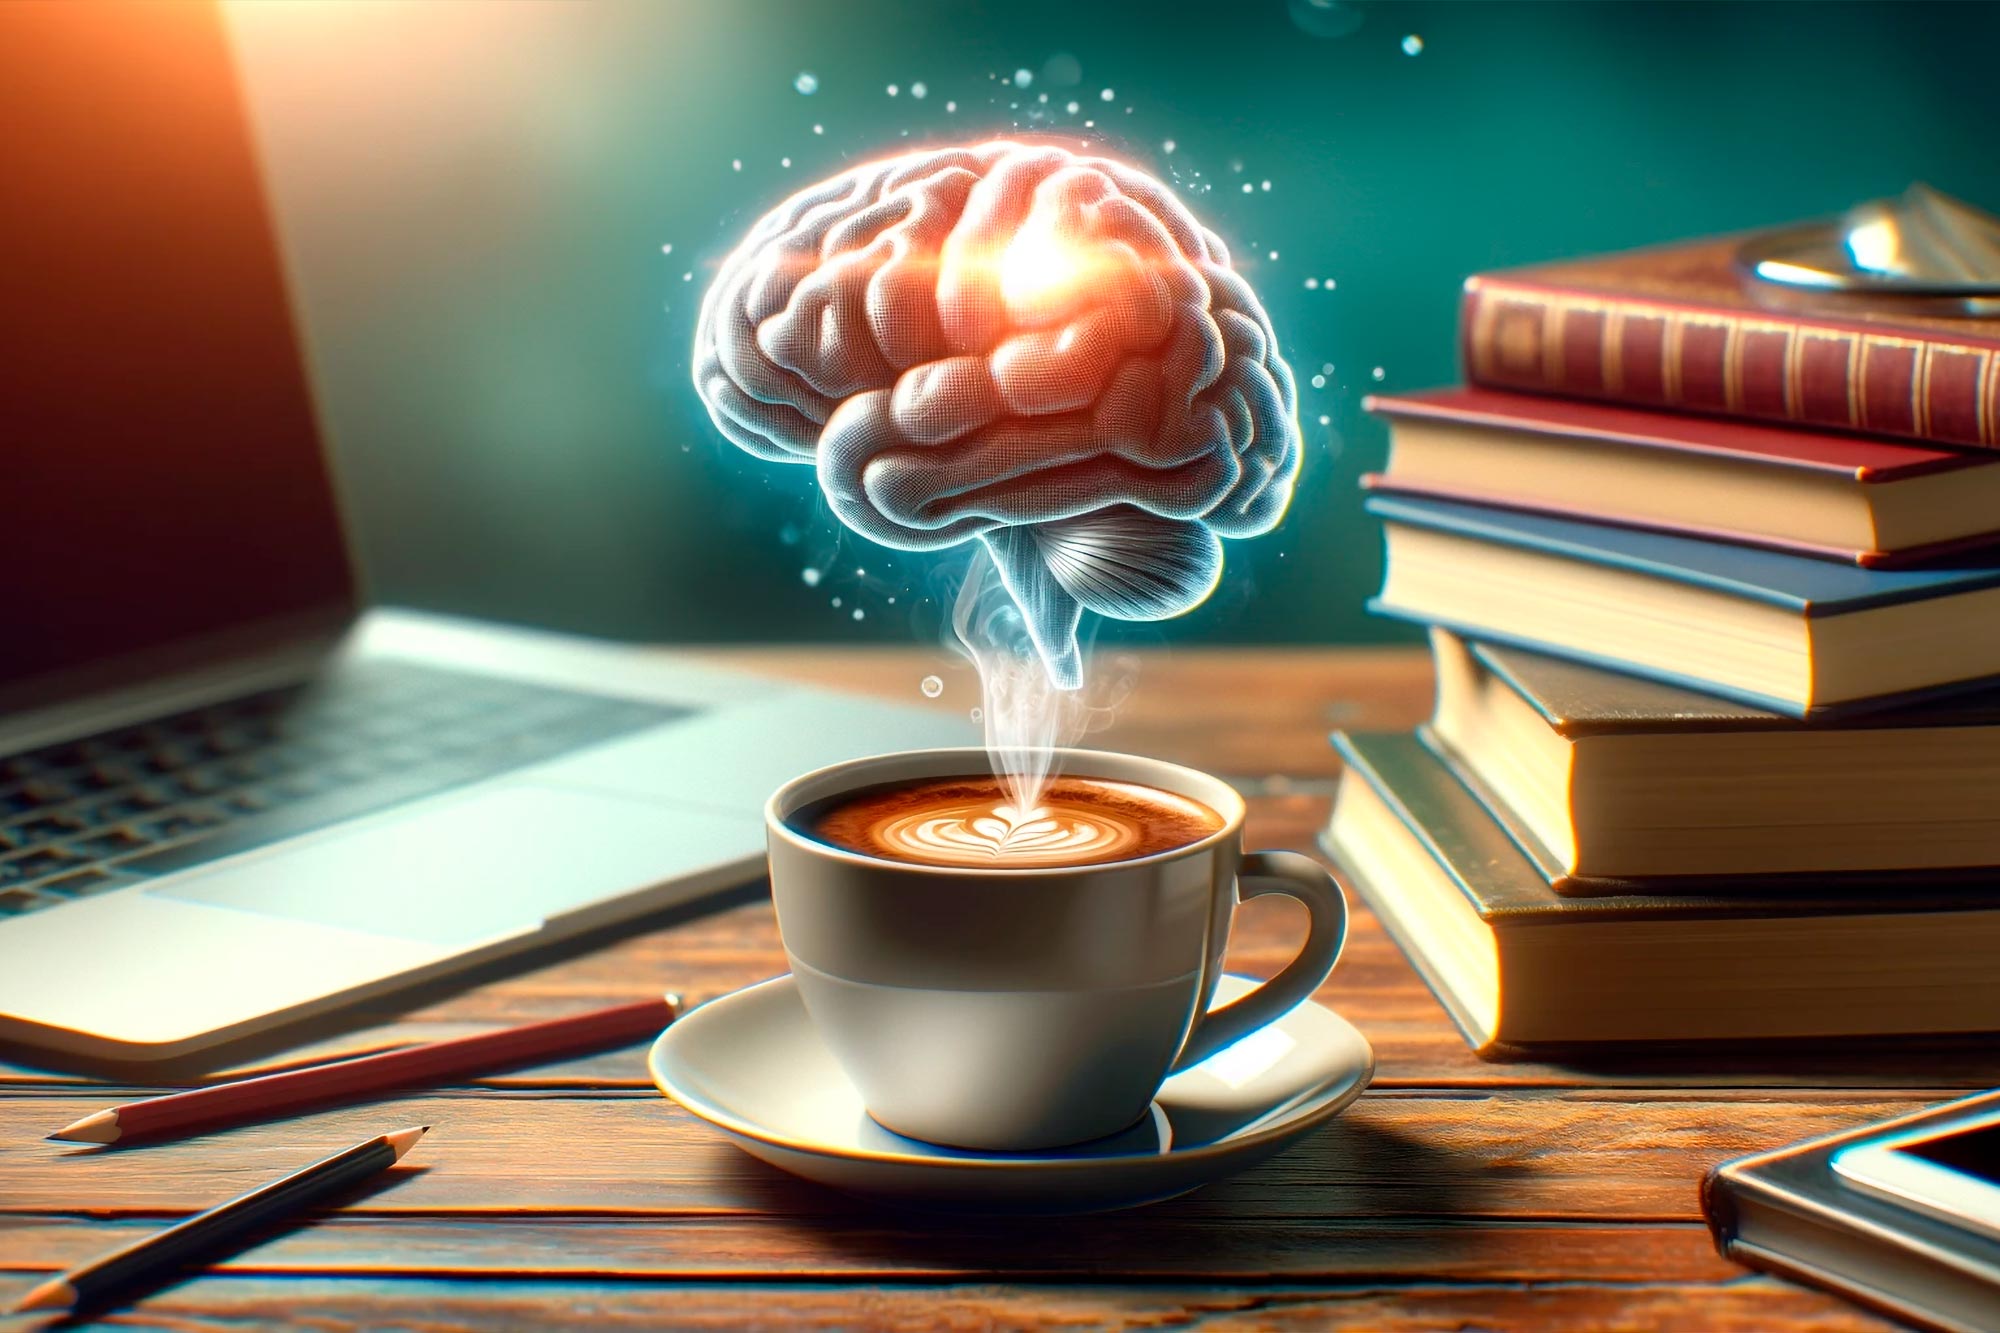 Scientists have discovered a secret brain booster in coffee